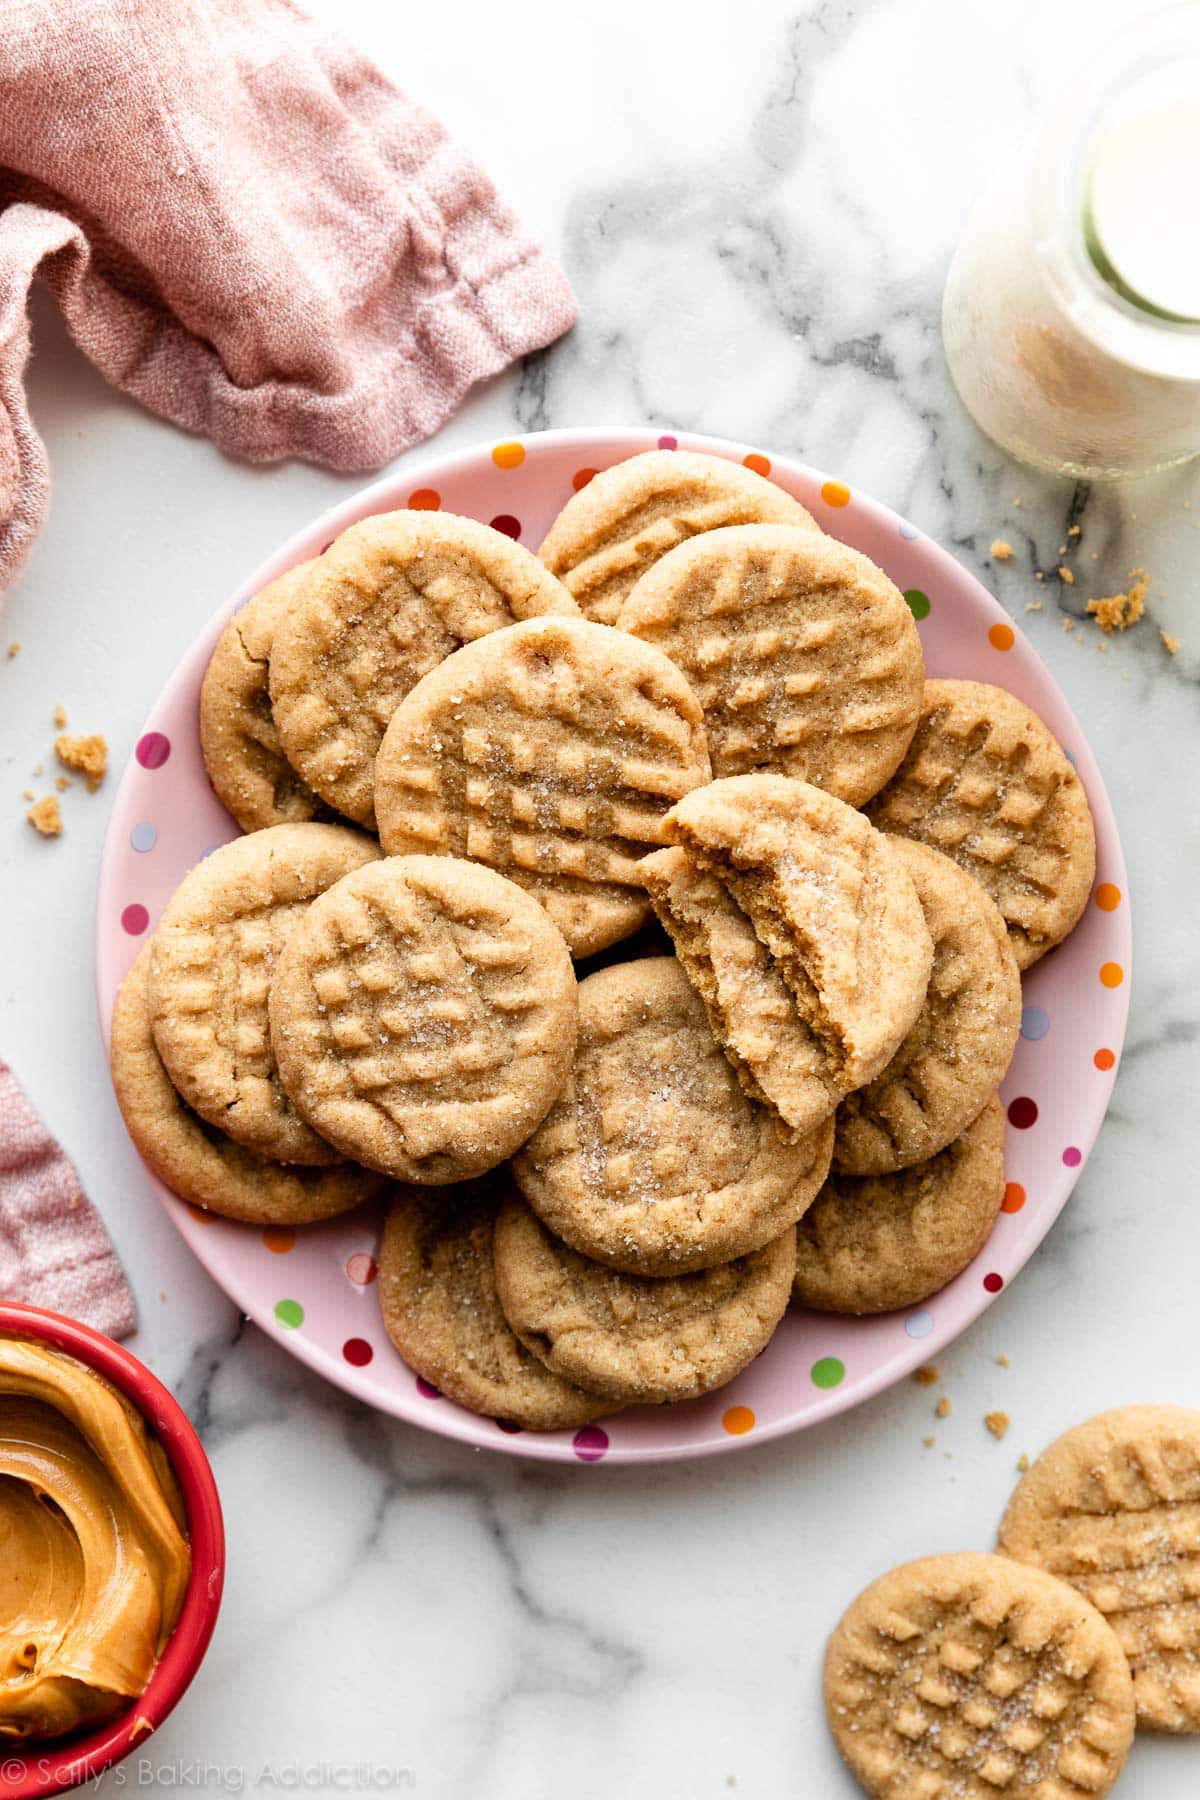 peanut butter cookies on pink polka dot plate